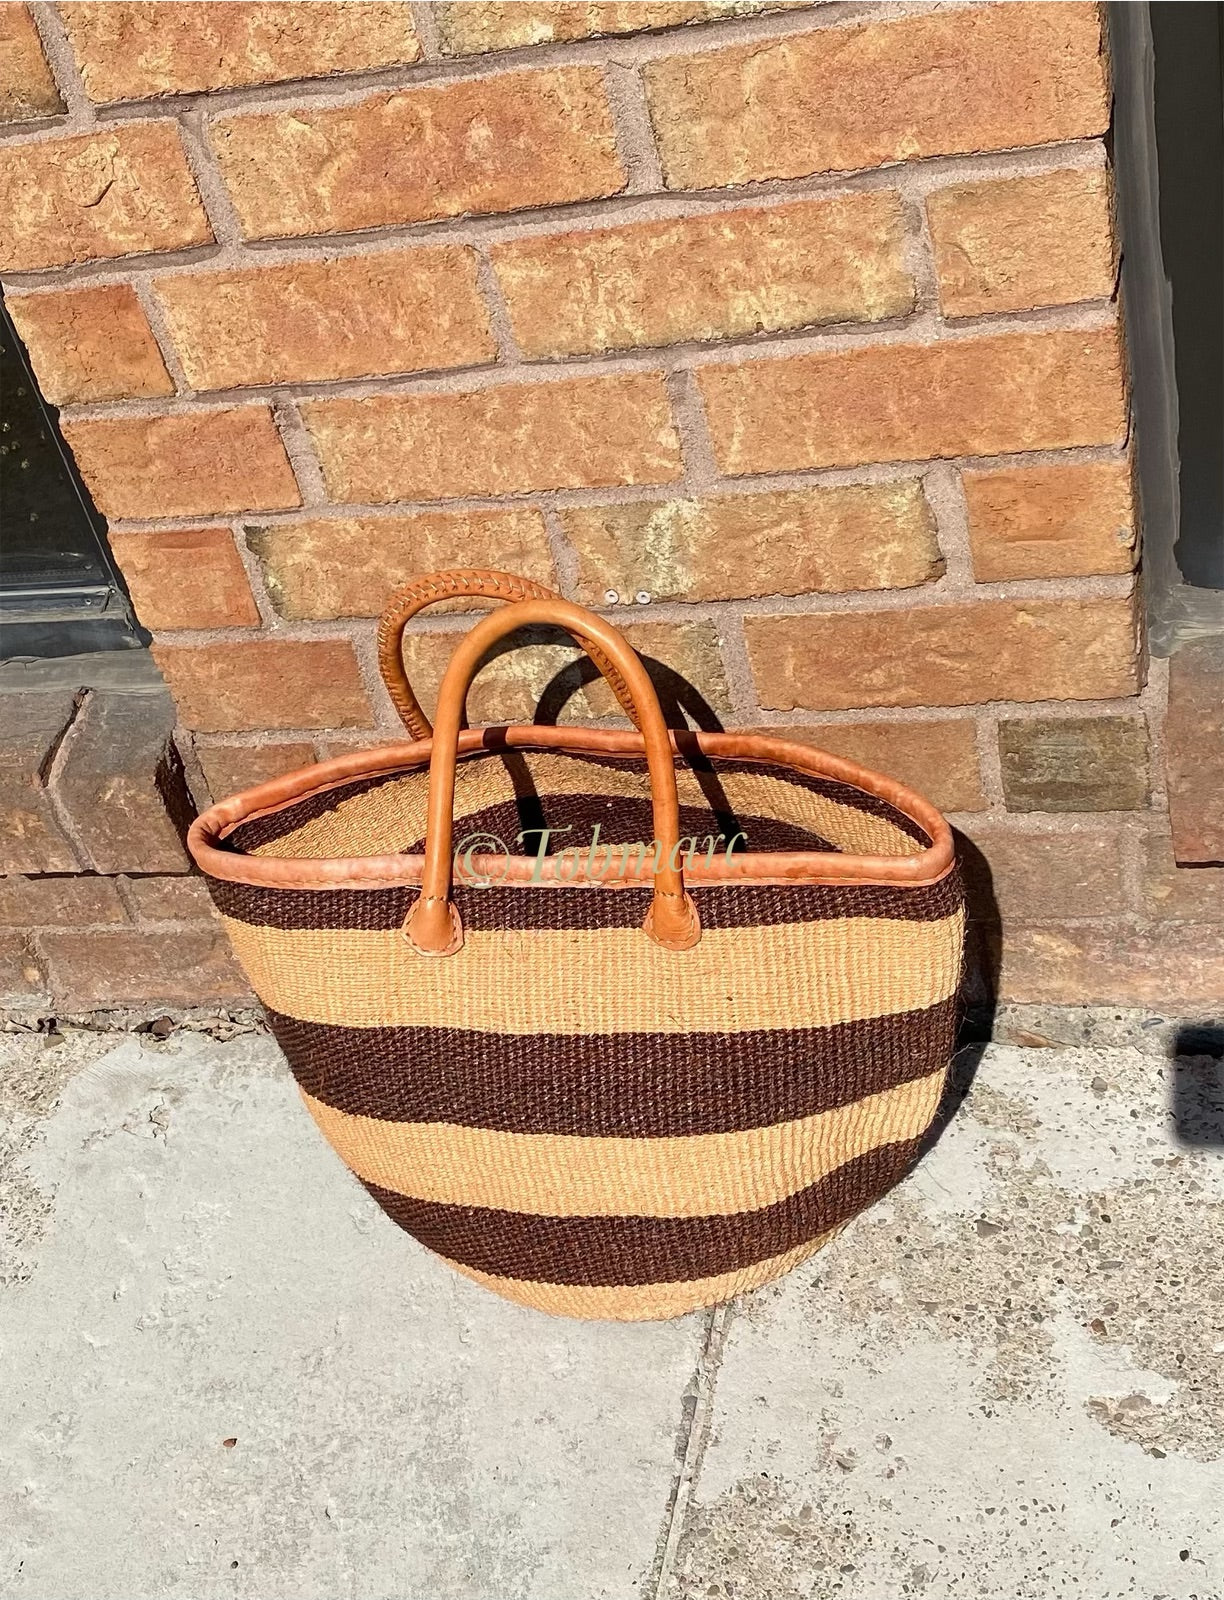 Storage Basket, Brown and Beige African Basket with Leather Handle, Shopping Bag, Beach Bag - Tobmarc Home Decor & Gifts 